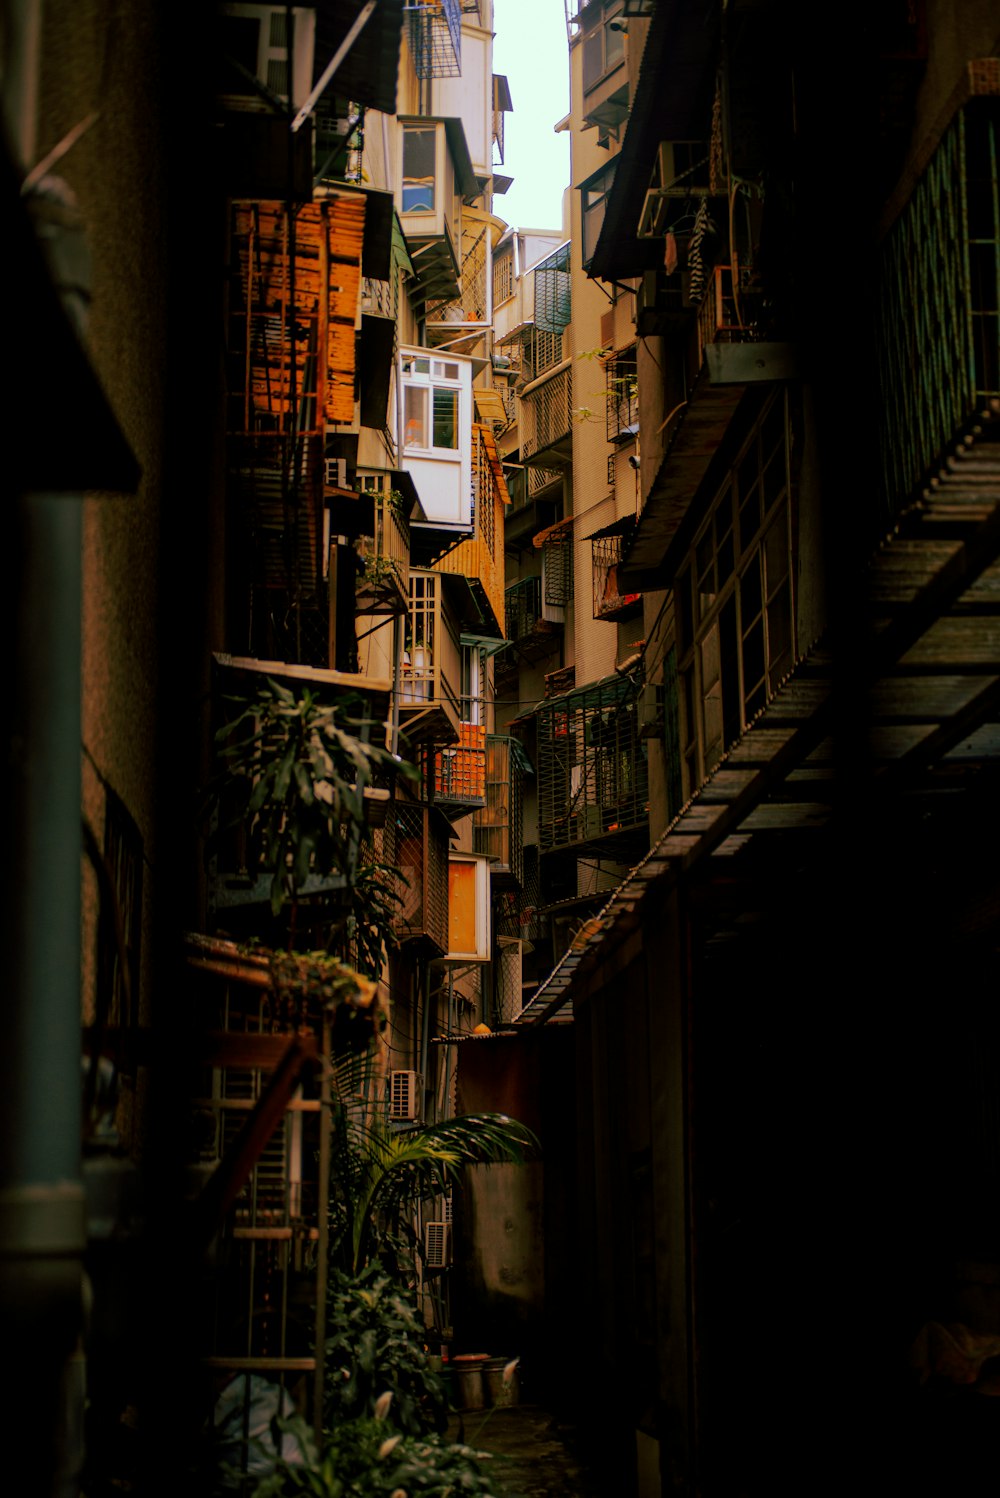 a narrow alley way in a city with lots of buildings